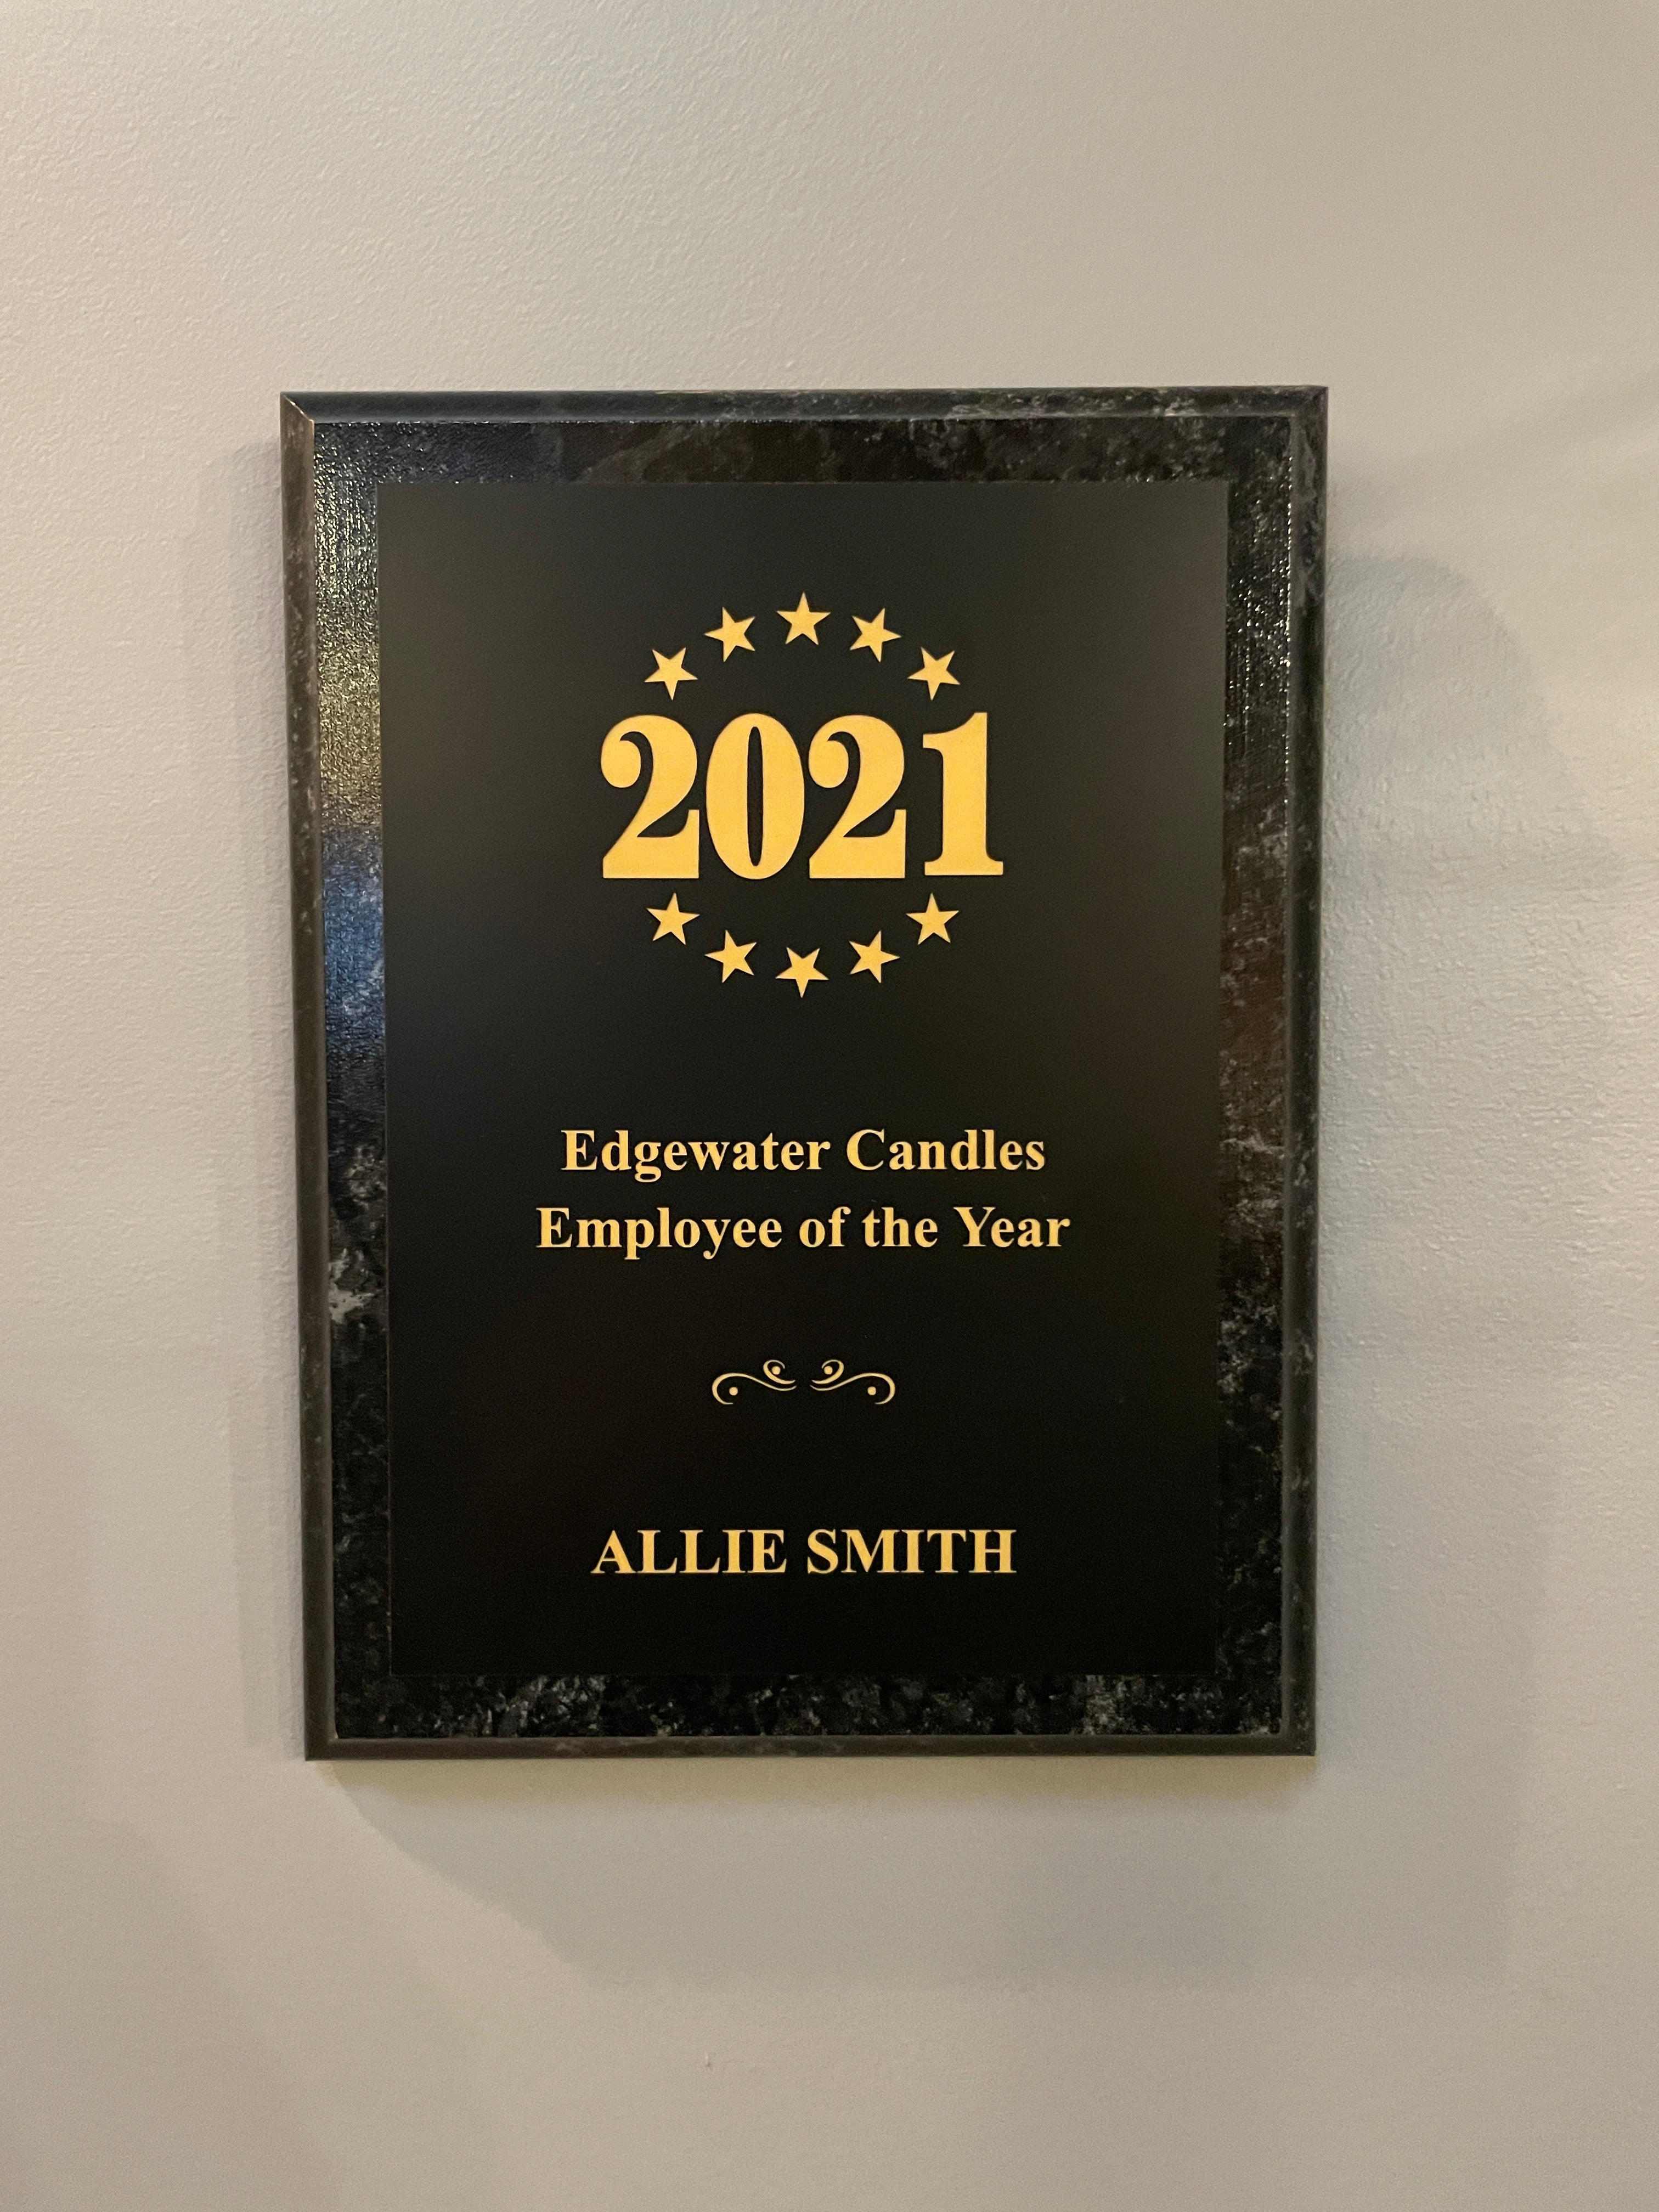 Employee of the Year - Allie Smith!